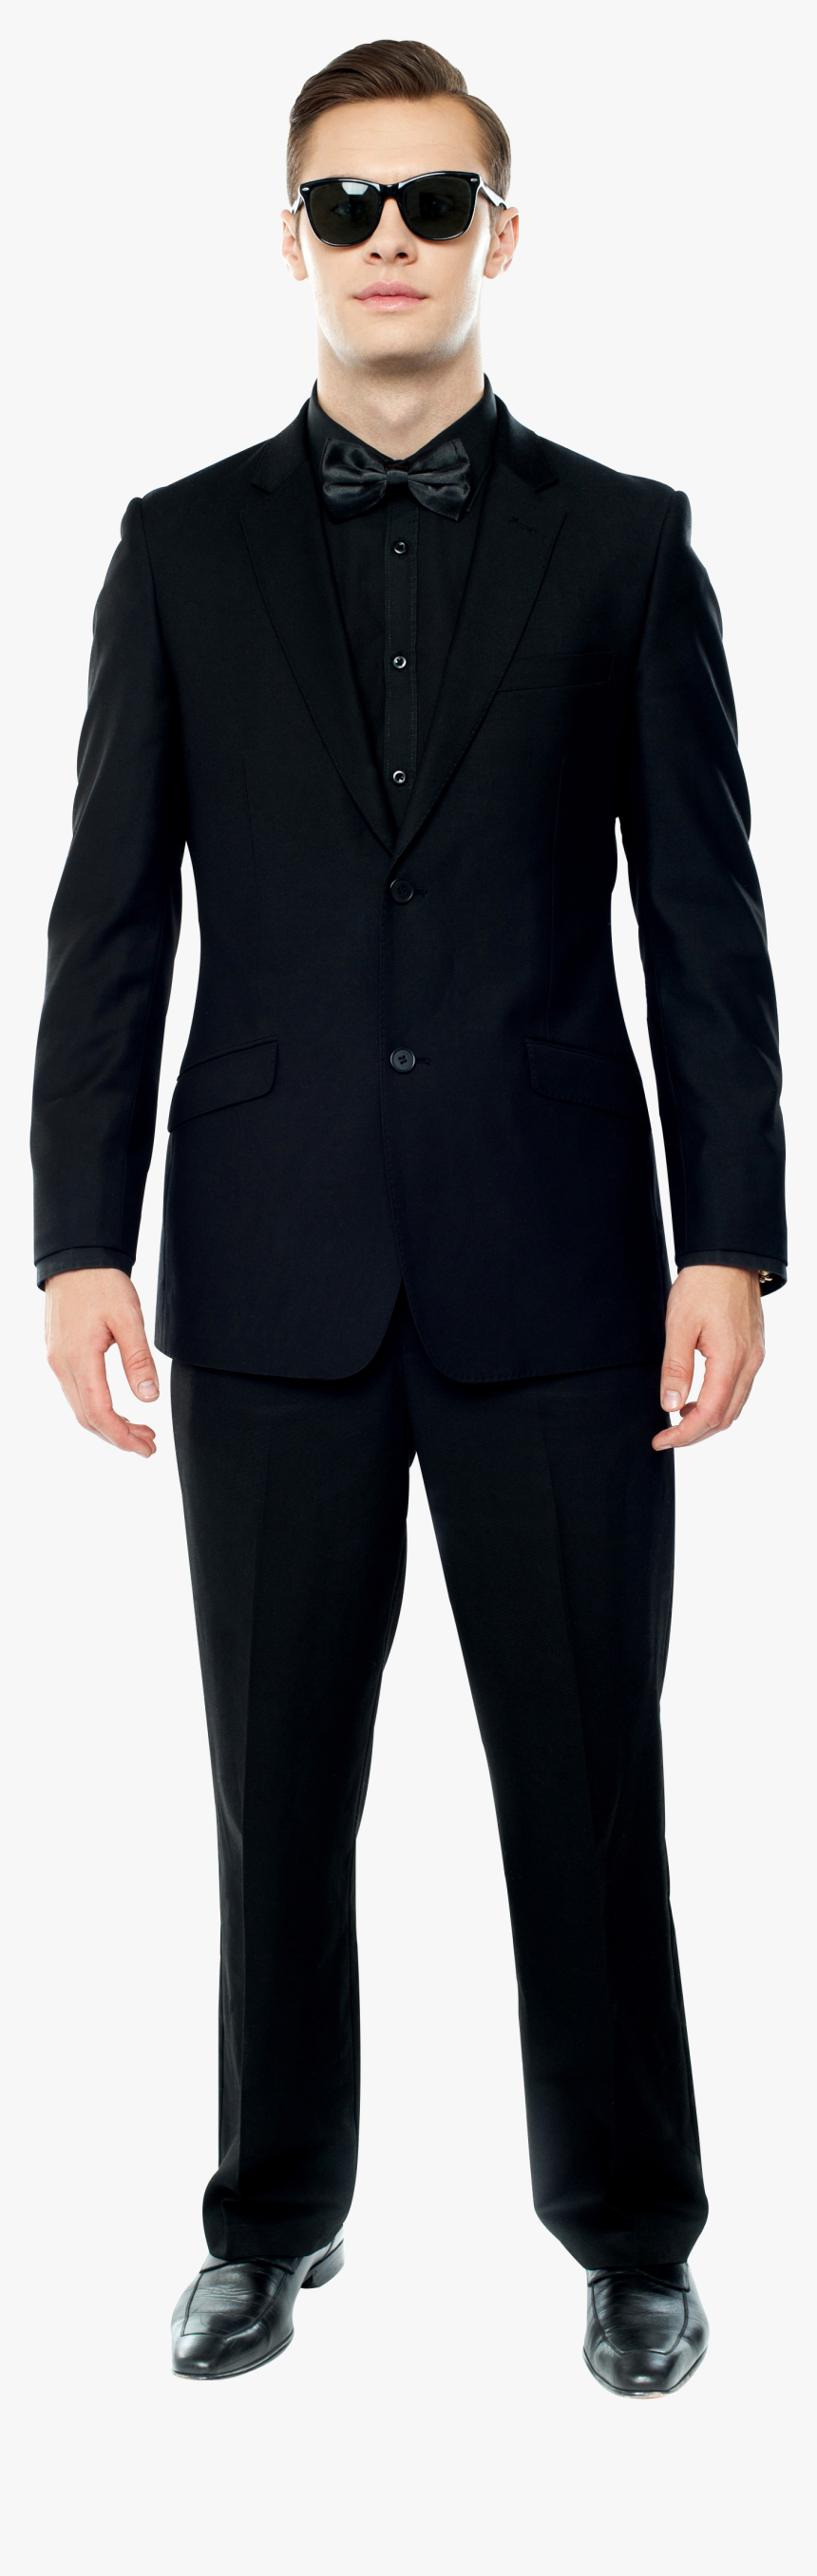 Men In Suit Download Free Png Image - Danny Devito Standing Up, Transparent Png, Free Download